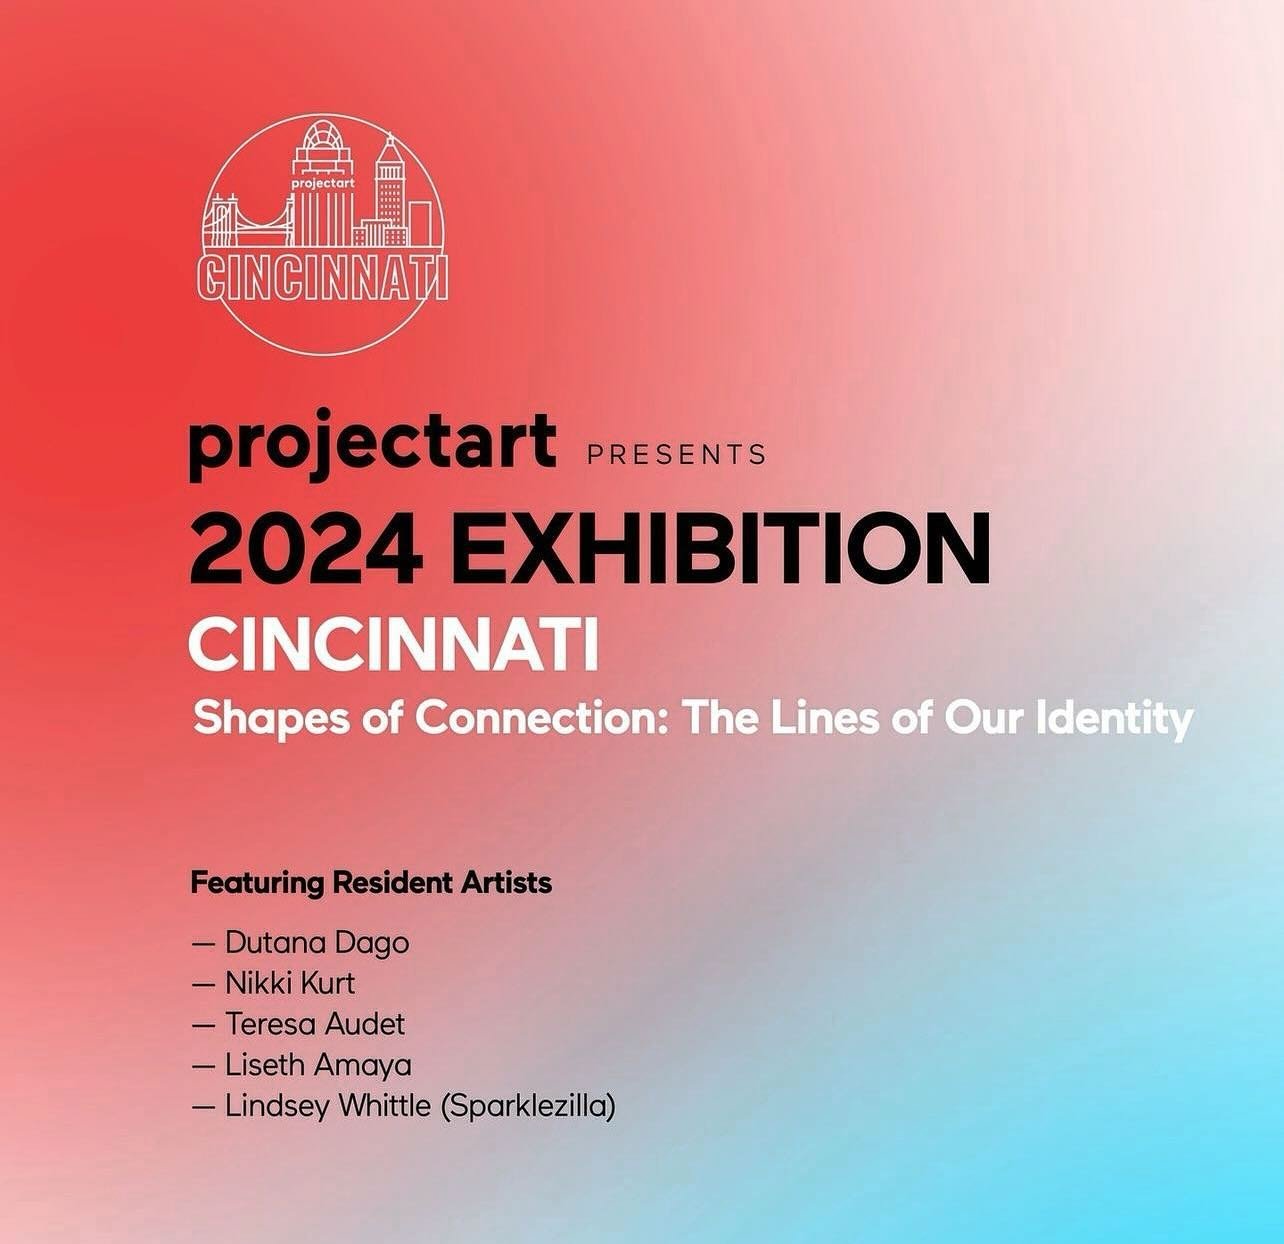 Thank you @projectartusa and @cincycac for this opportunity. Opening reception tonight at Contemporary art Center Cincinnati #contemporaryart #latinaartist #aartist #londonartist